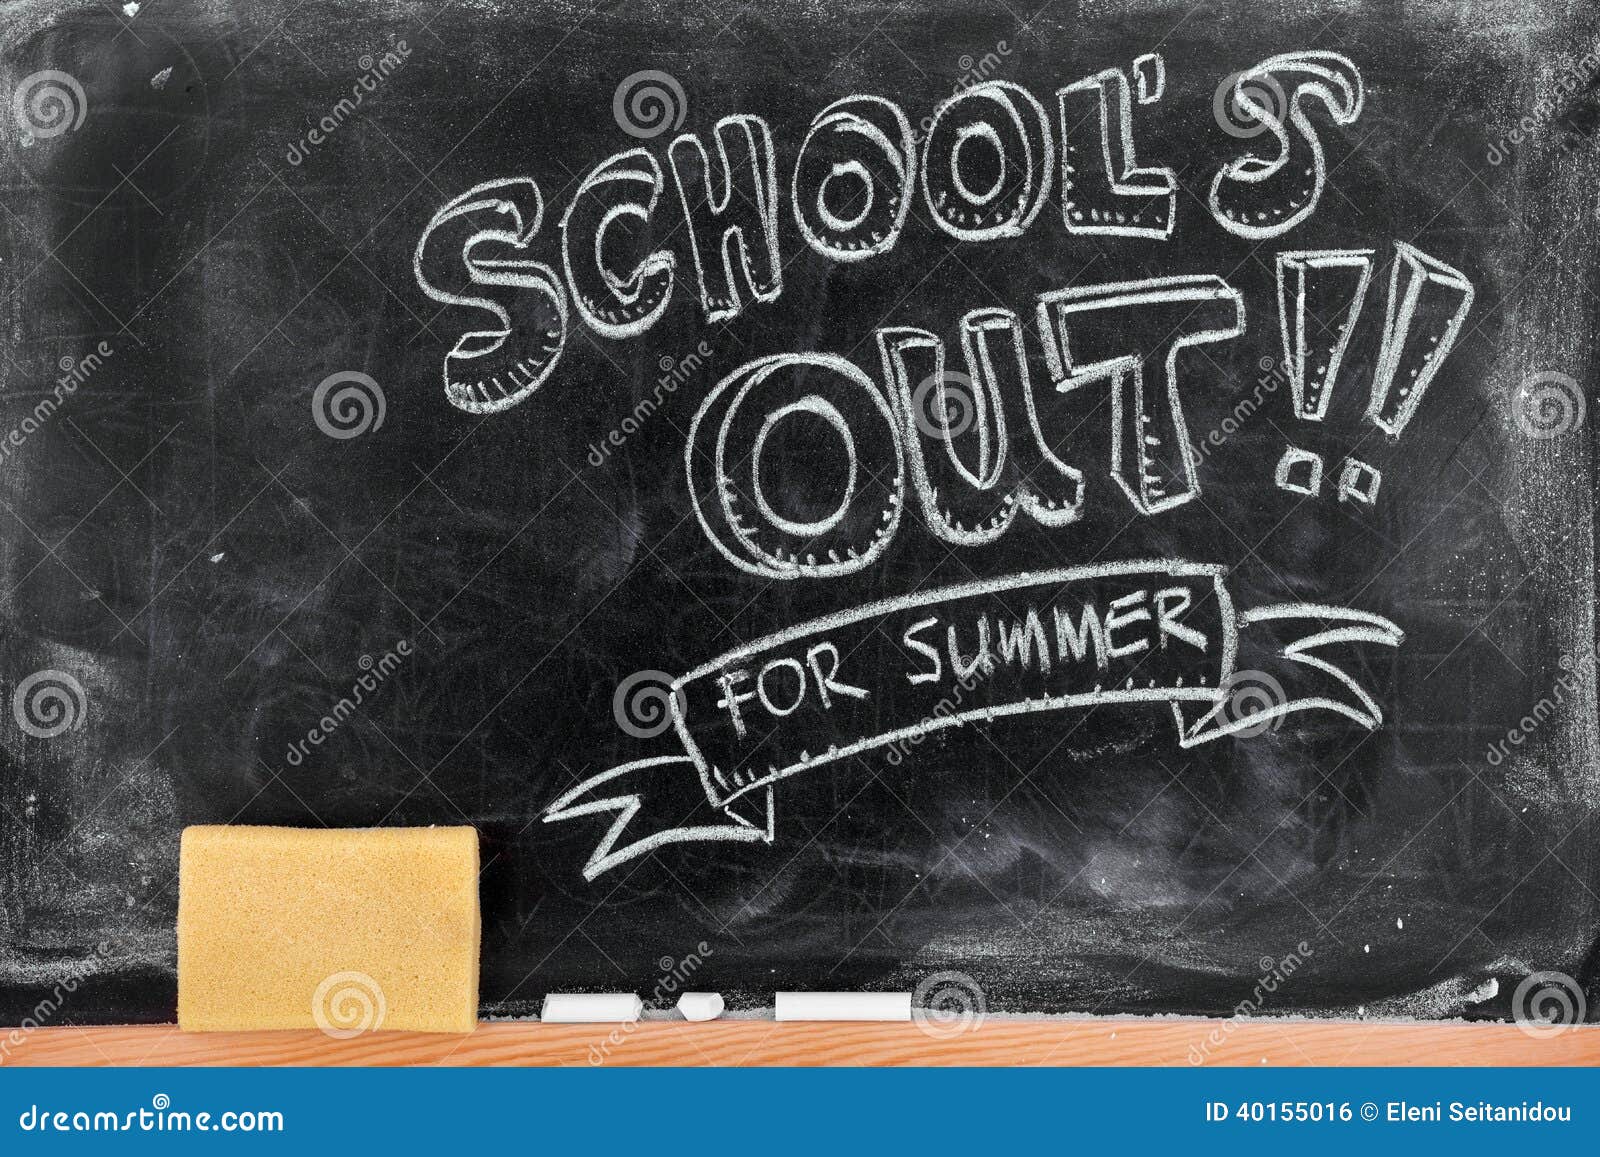 Download School's Out Stock Photo - Image: 40155016